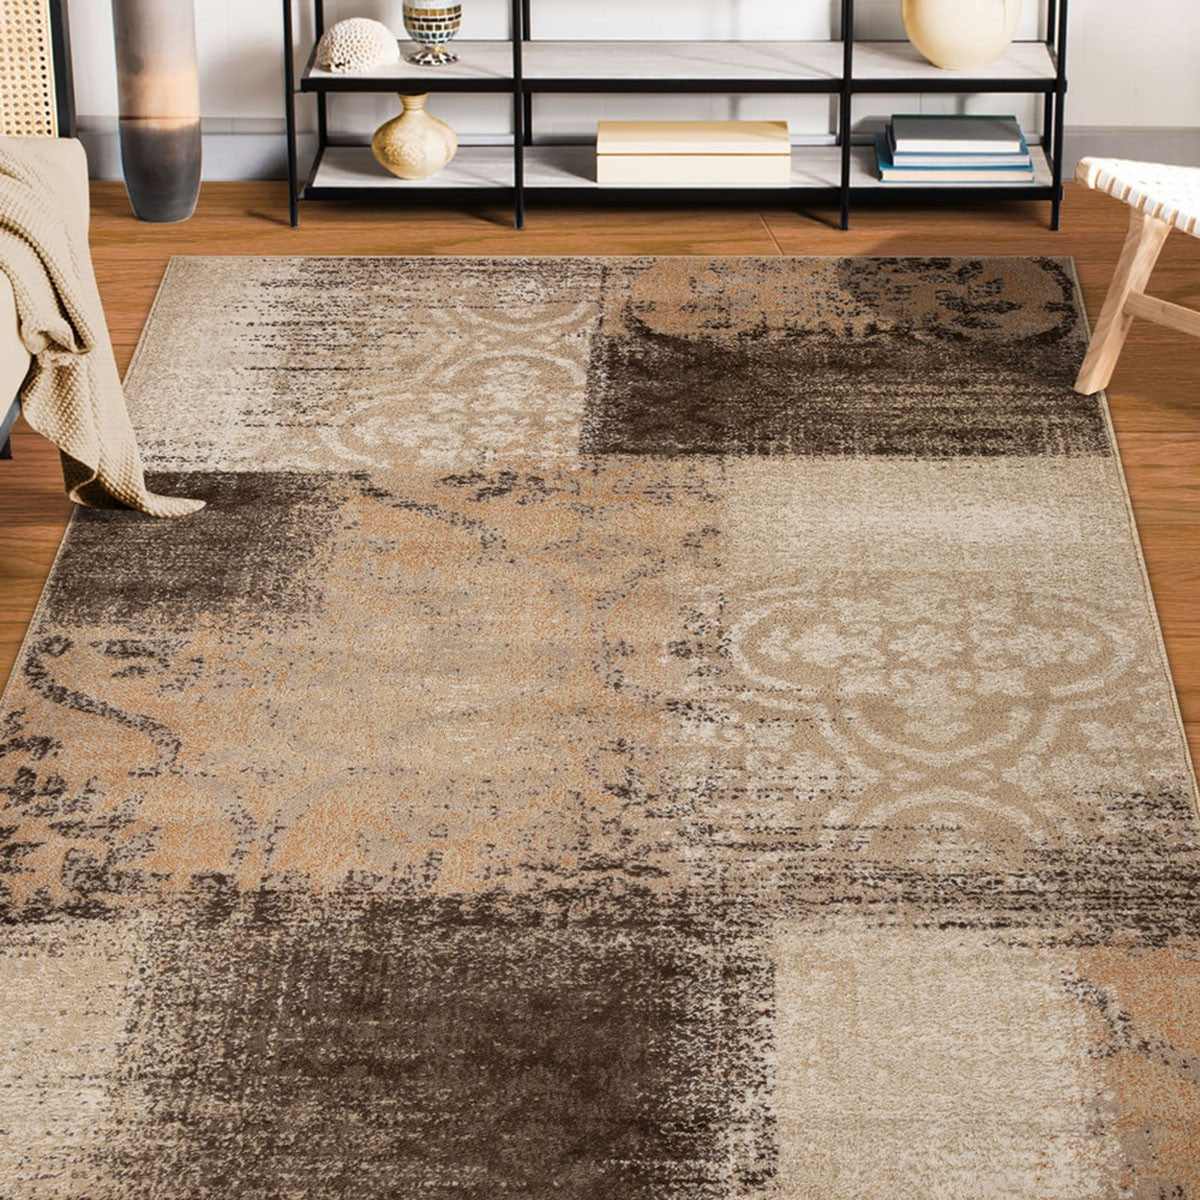 5' X 8' Beige Gray And Black Damask Distressed Stain Resistant Area Rug